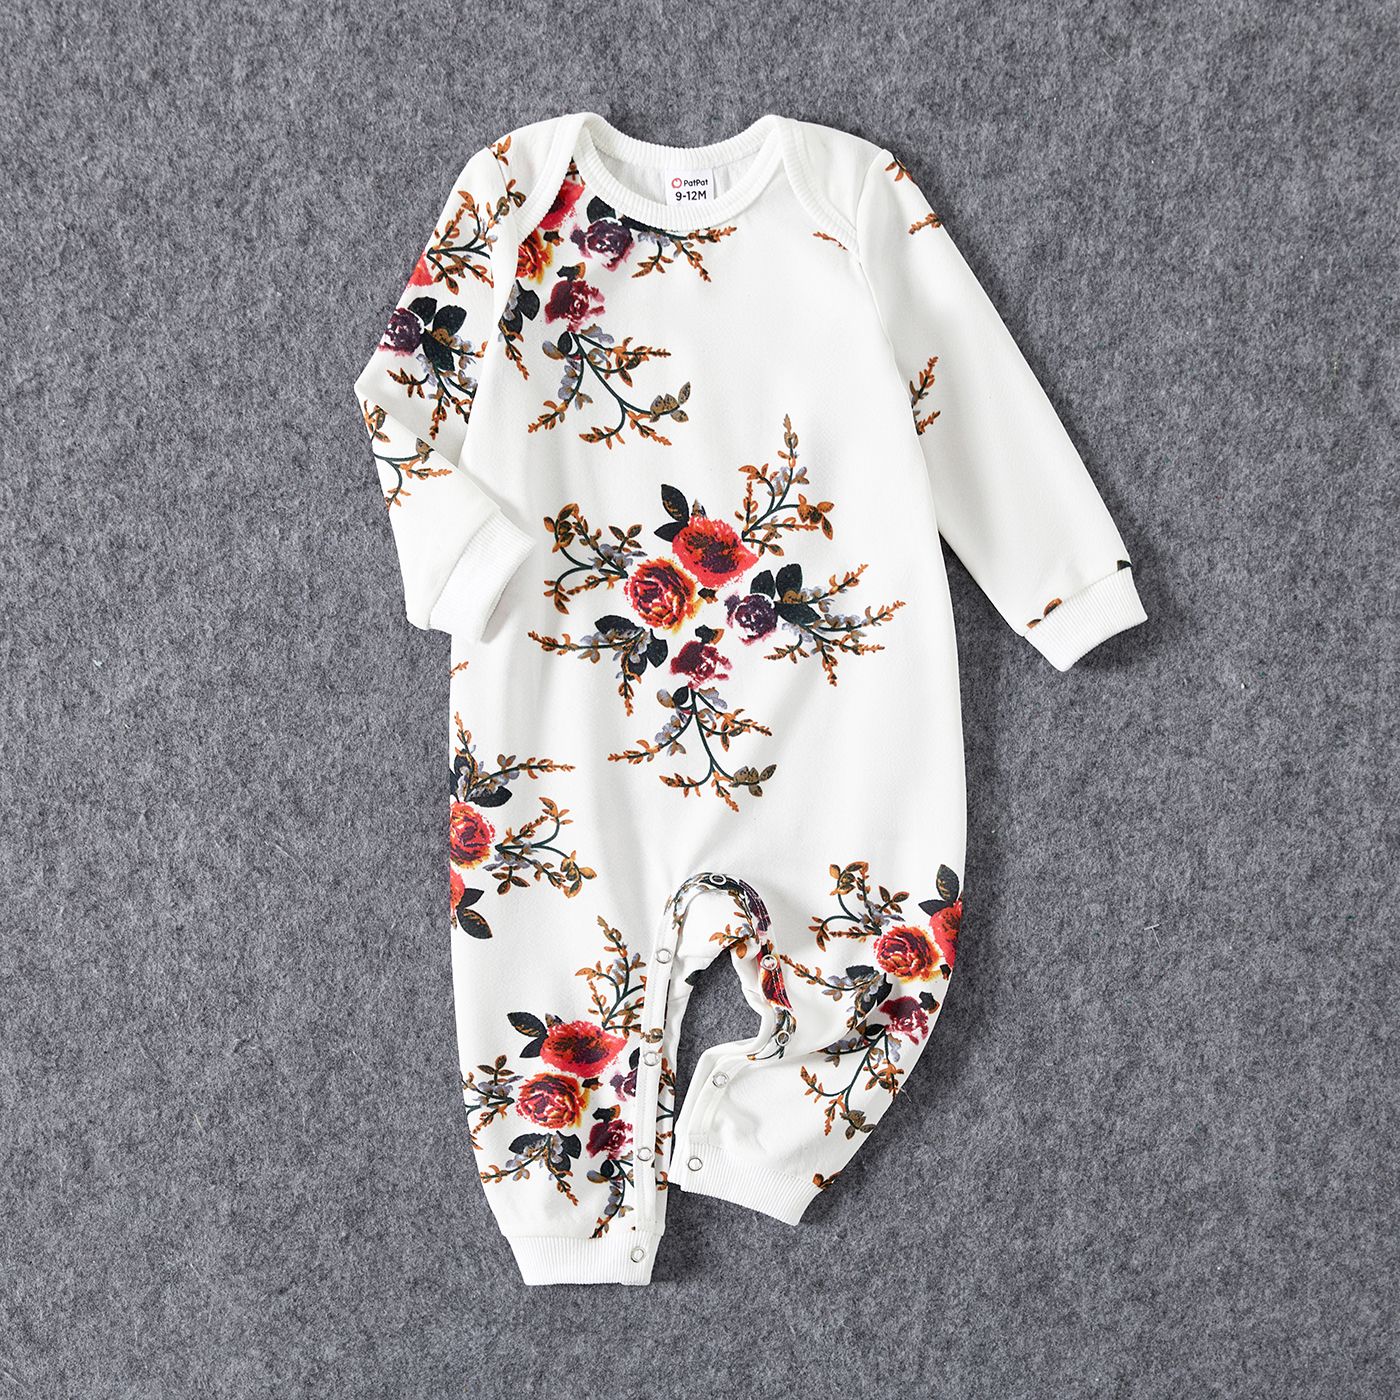 Family Matching Allover Floral Print And Colorblock Tops